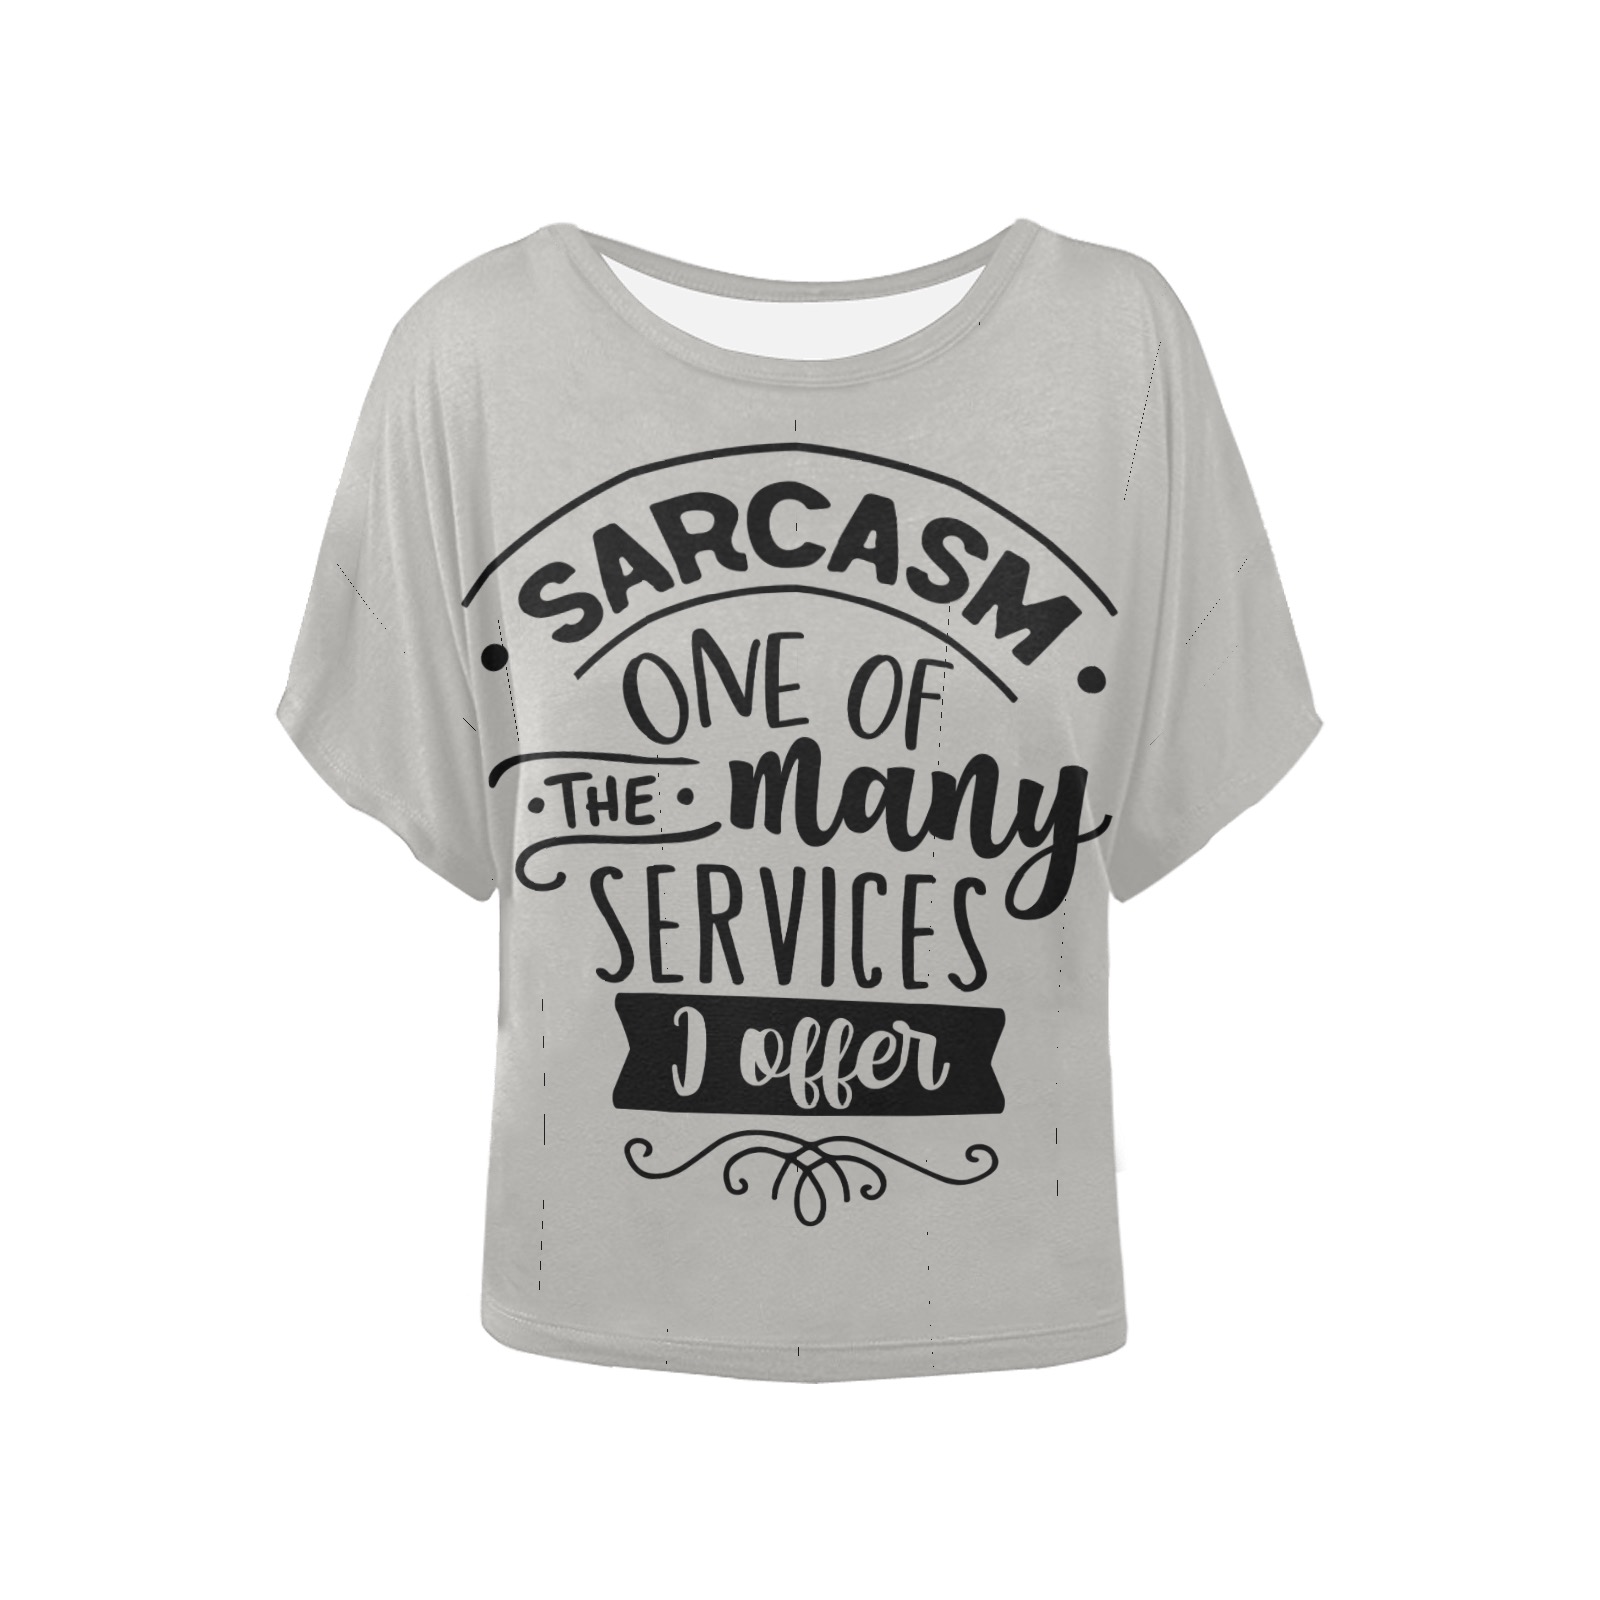 Sarcasm one of the Women's Batwing-Sleeved Blouse T shirt (Model T44)